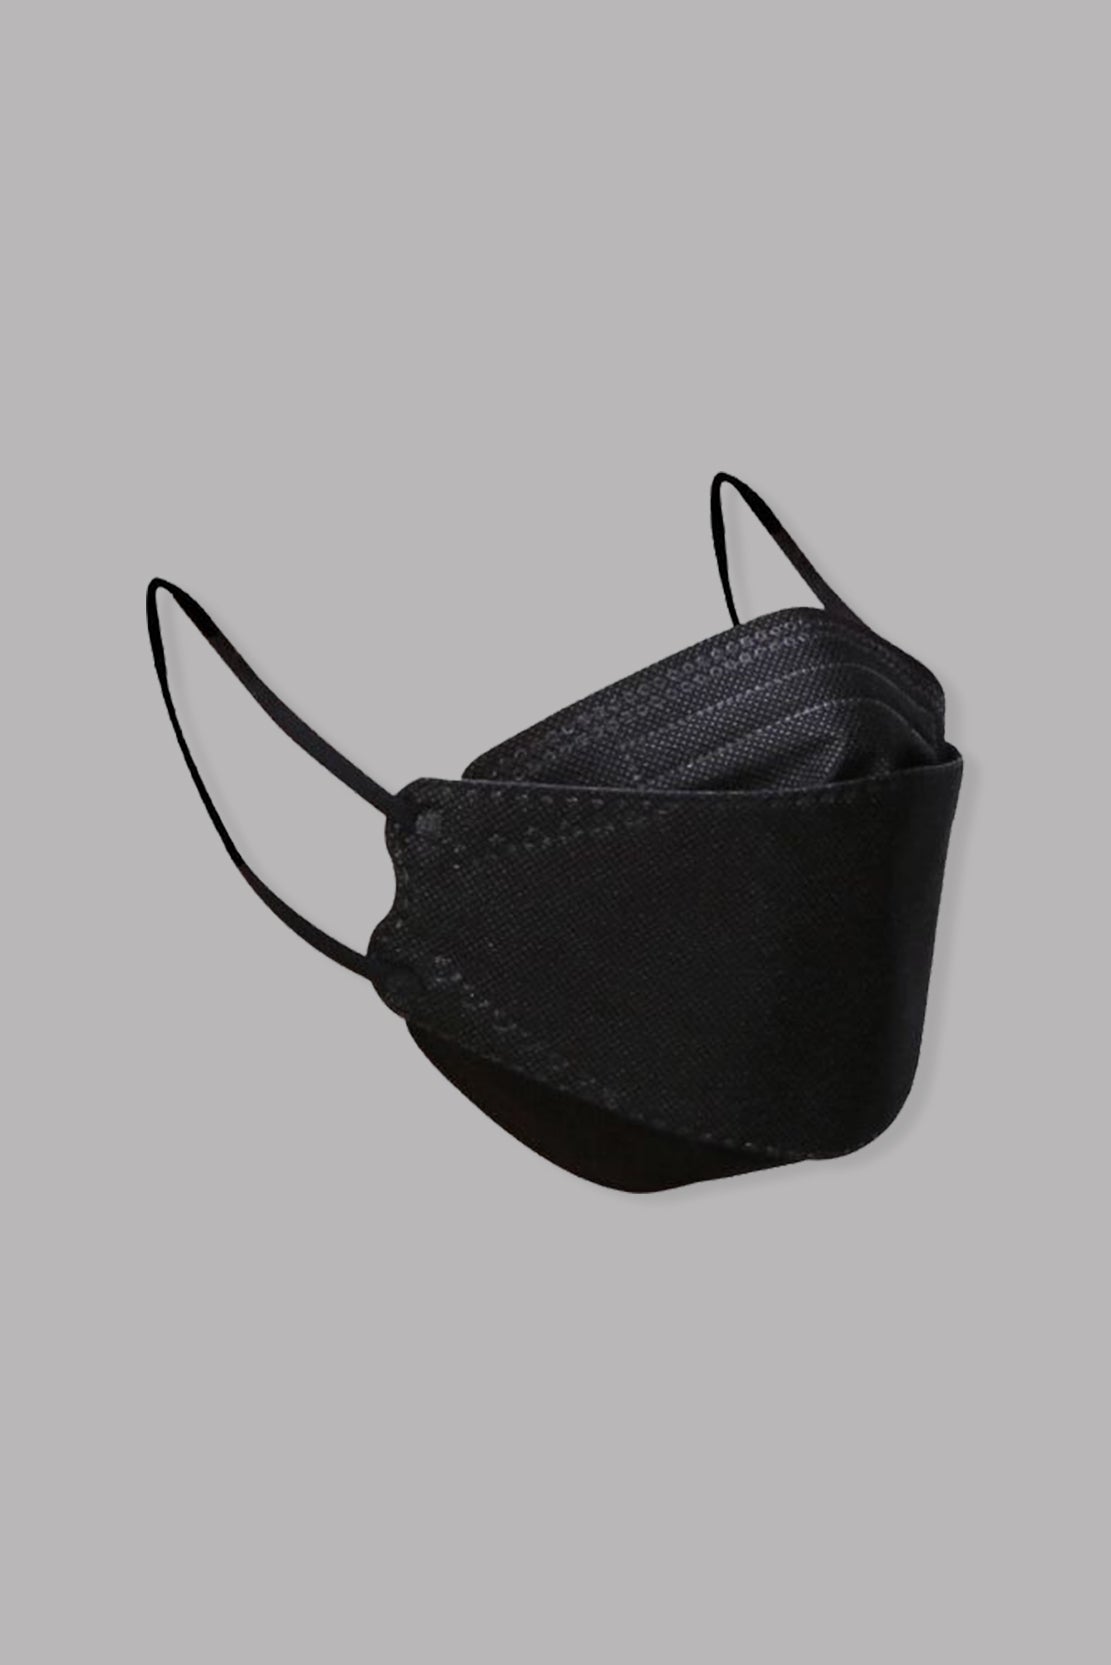 Stylish black KF94 face mask, with soft black ear loops and high quality fabric. 